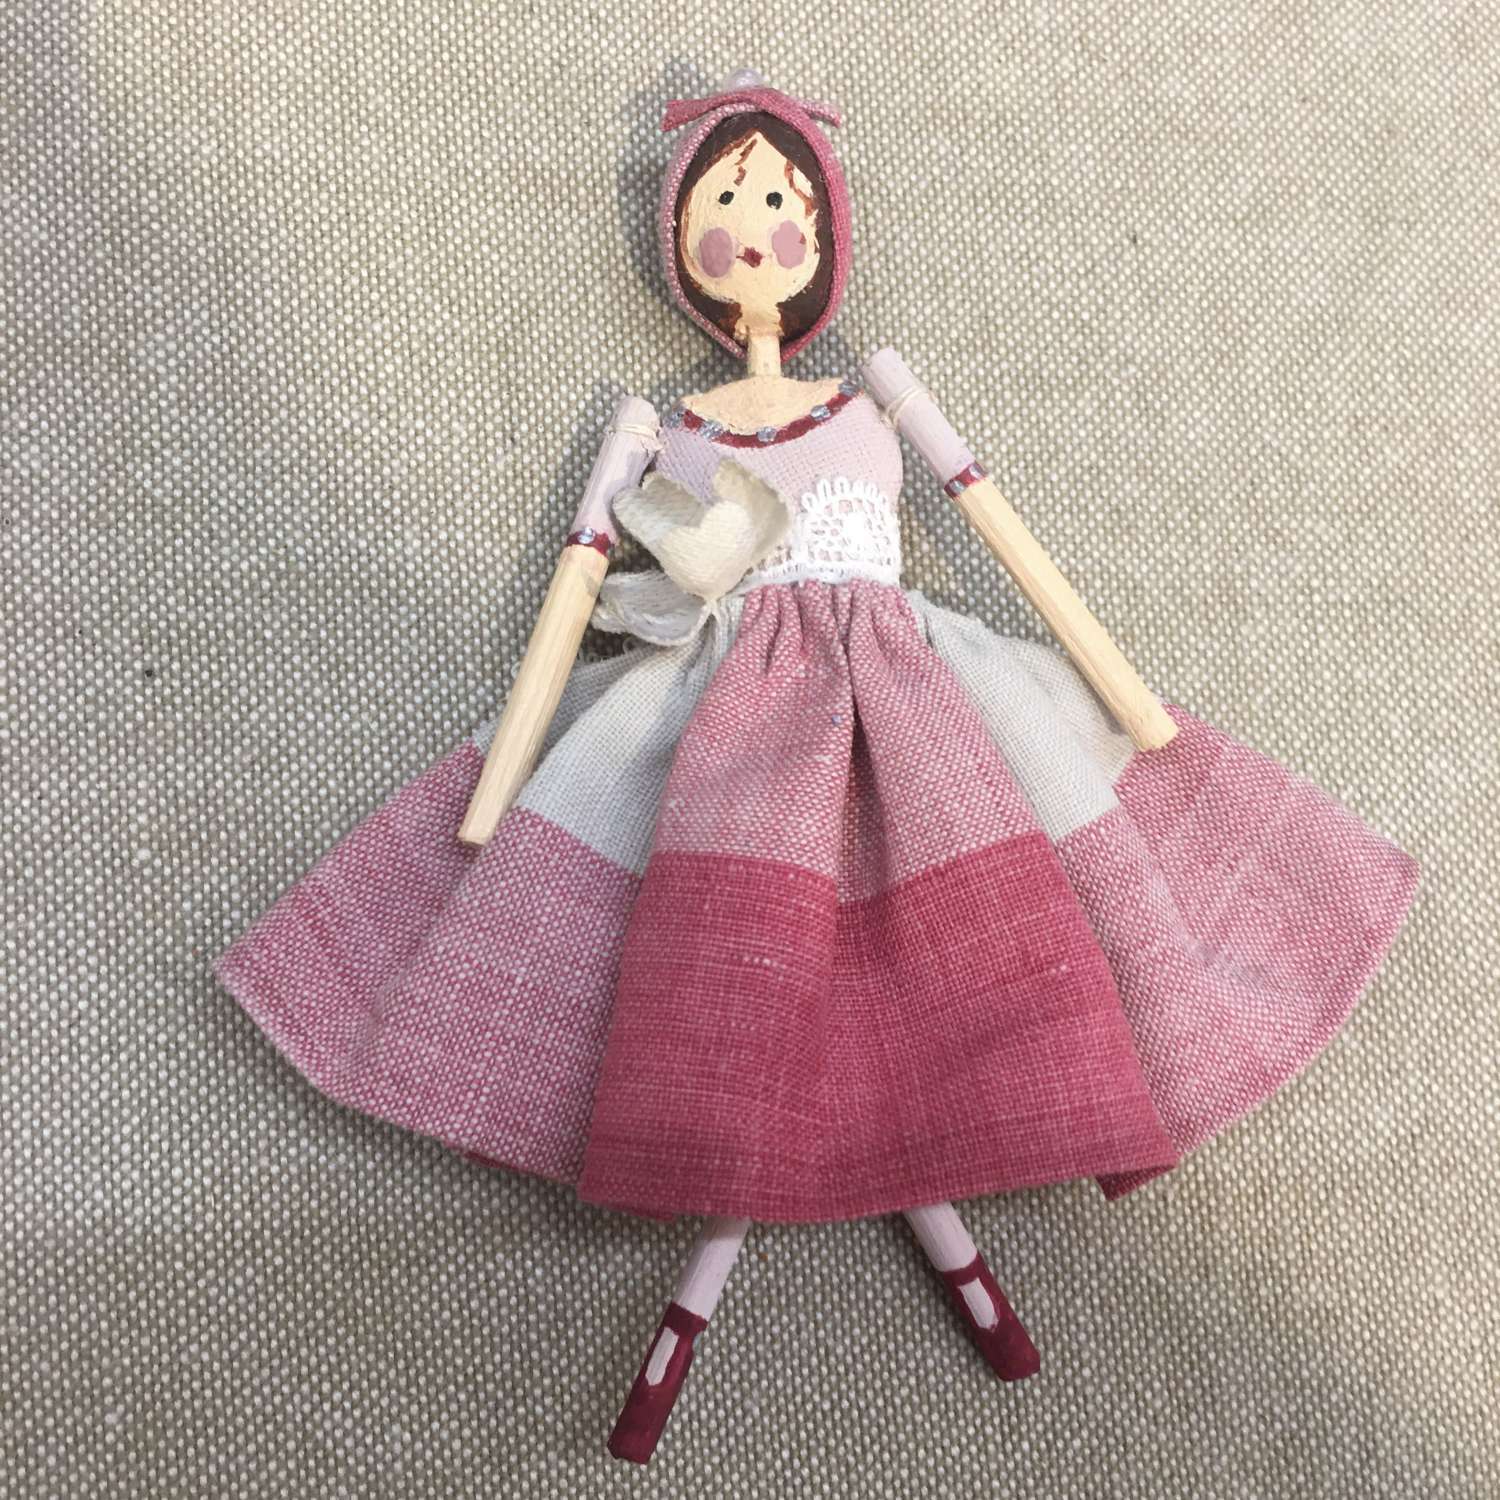 A tiny fairy doll handmade from paper clay with vintage fabrics